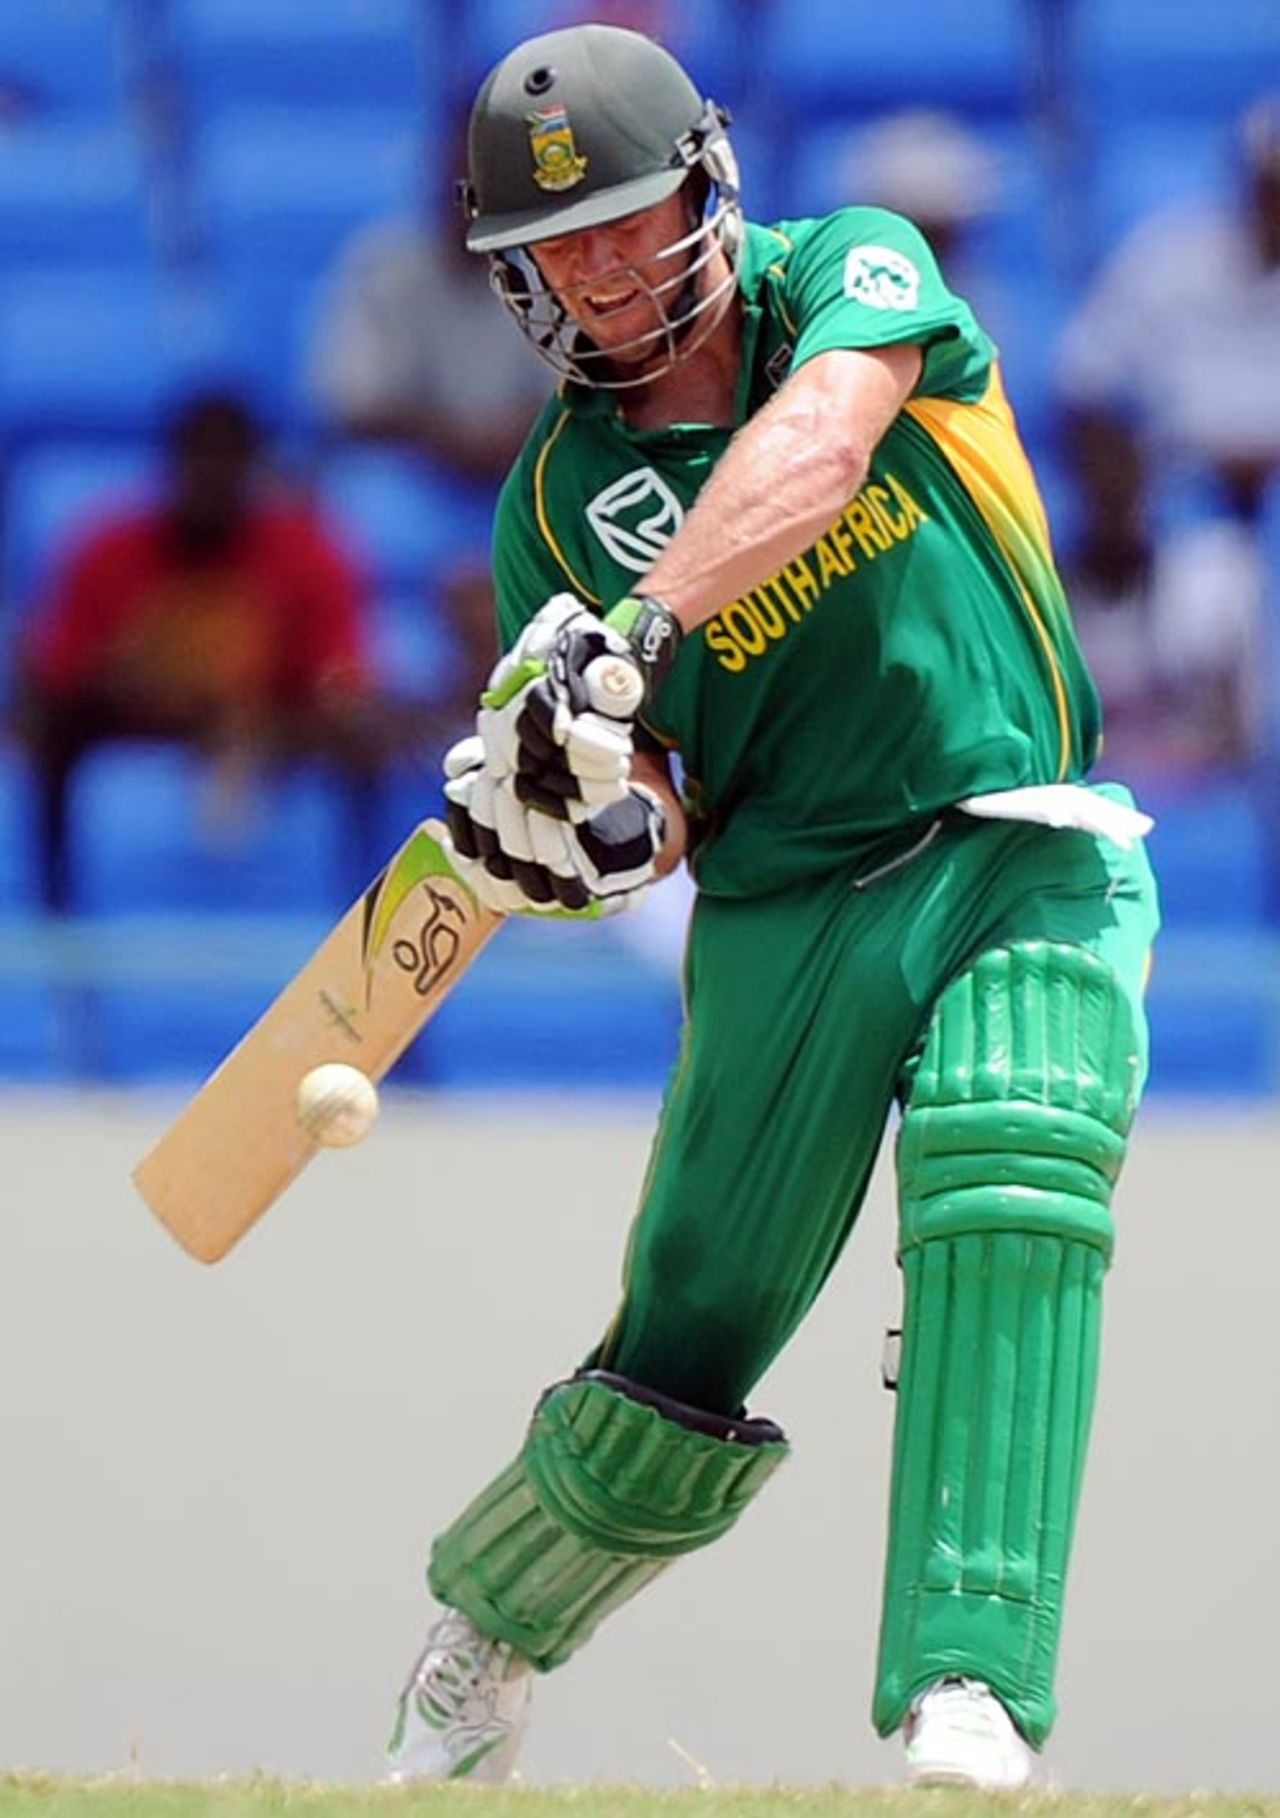 AB de Villiers lines up to hit it, West Indies v South Africa, 1st ODI, Antigua, May 22, 2010